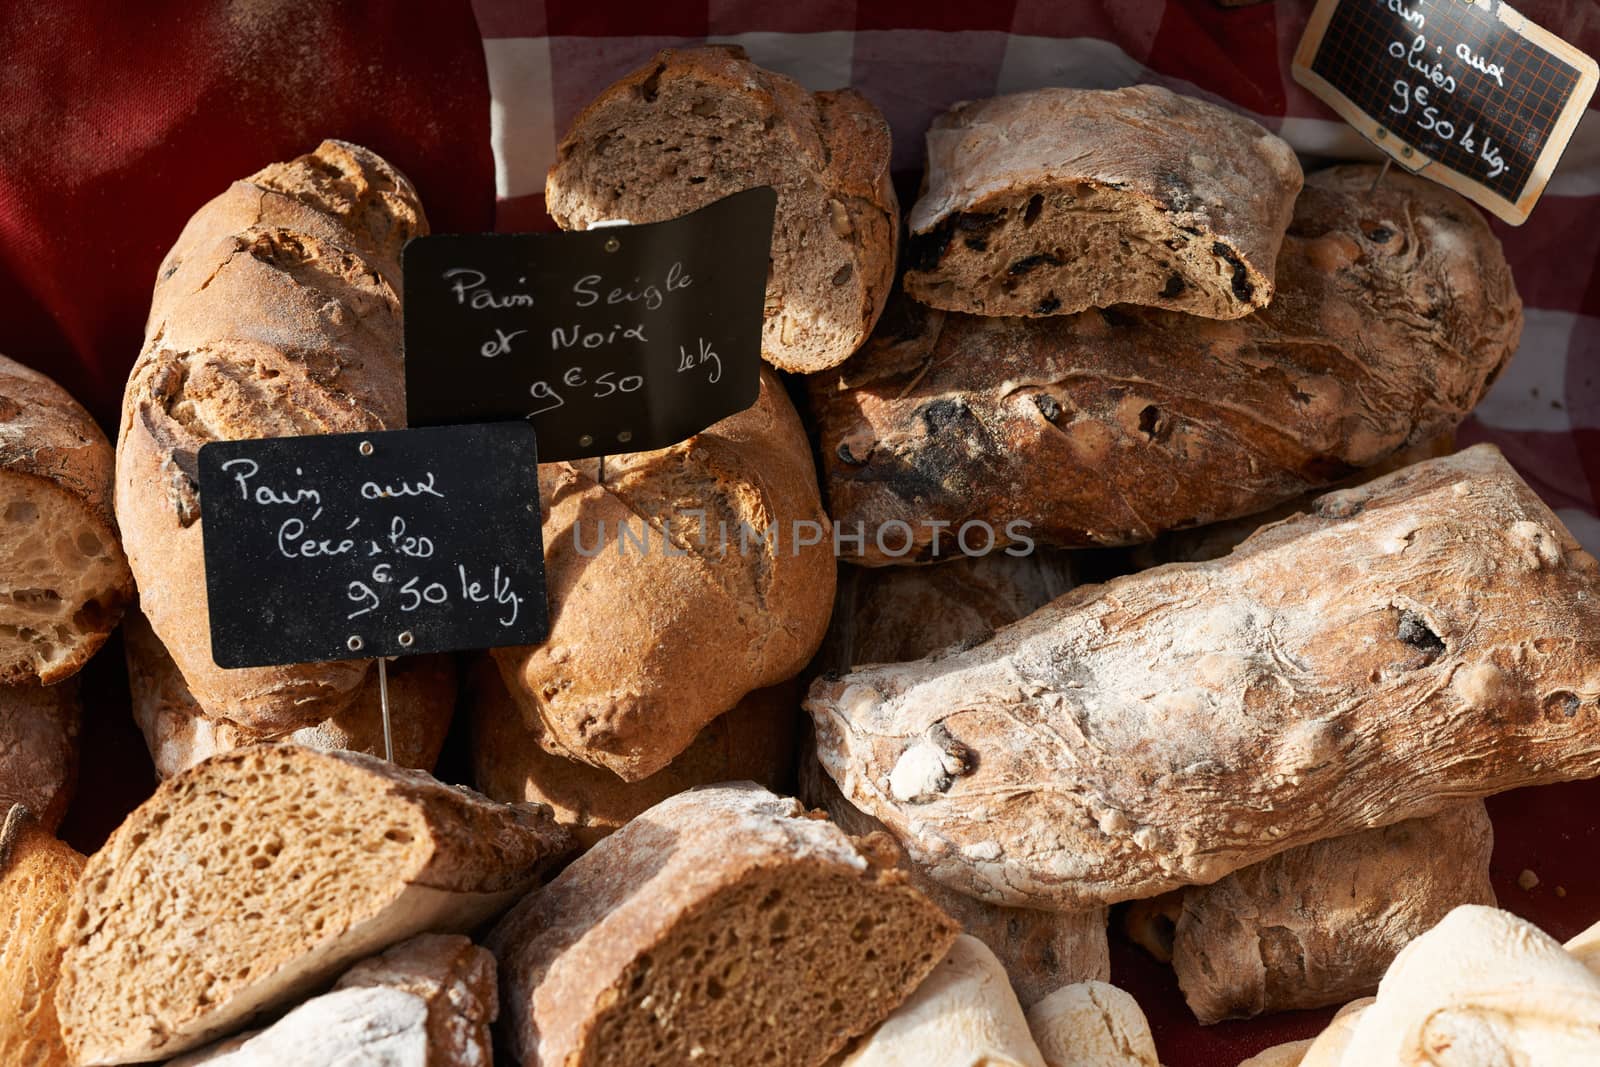 Traditional Provence bread by ecobo